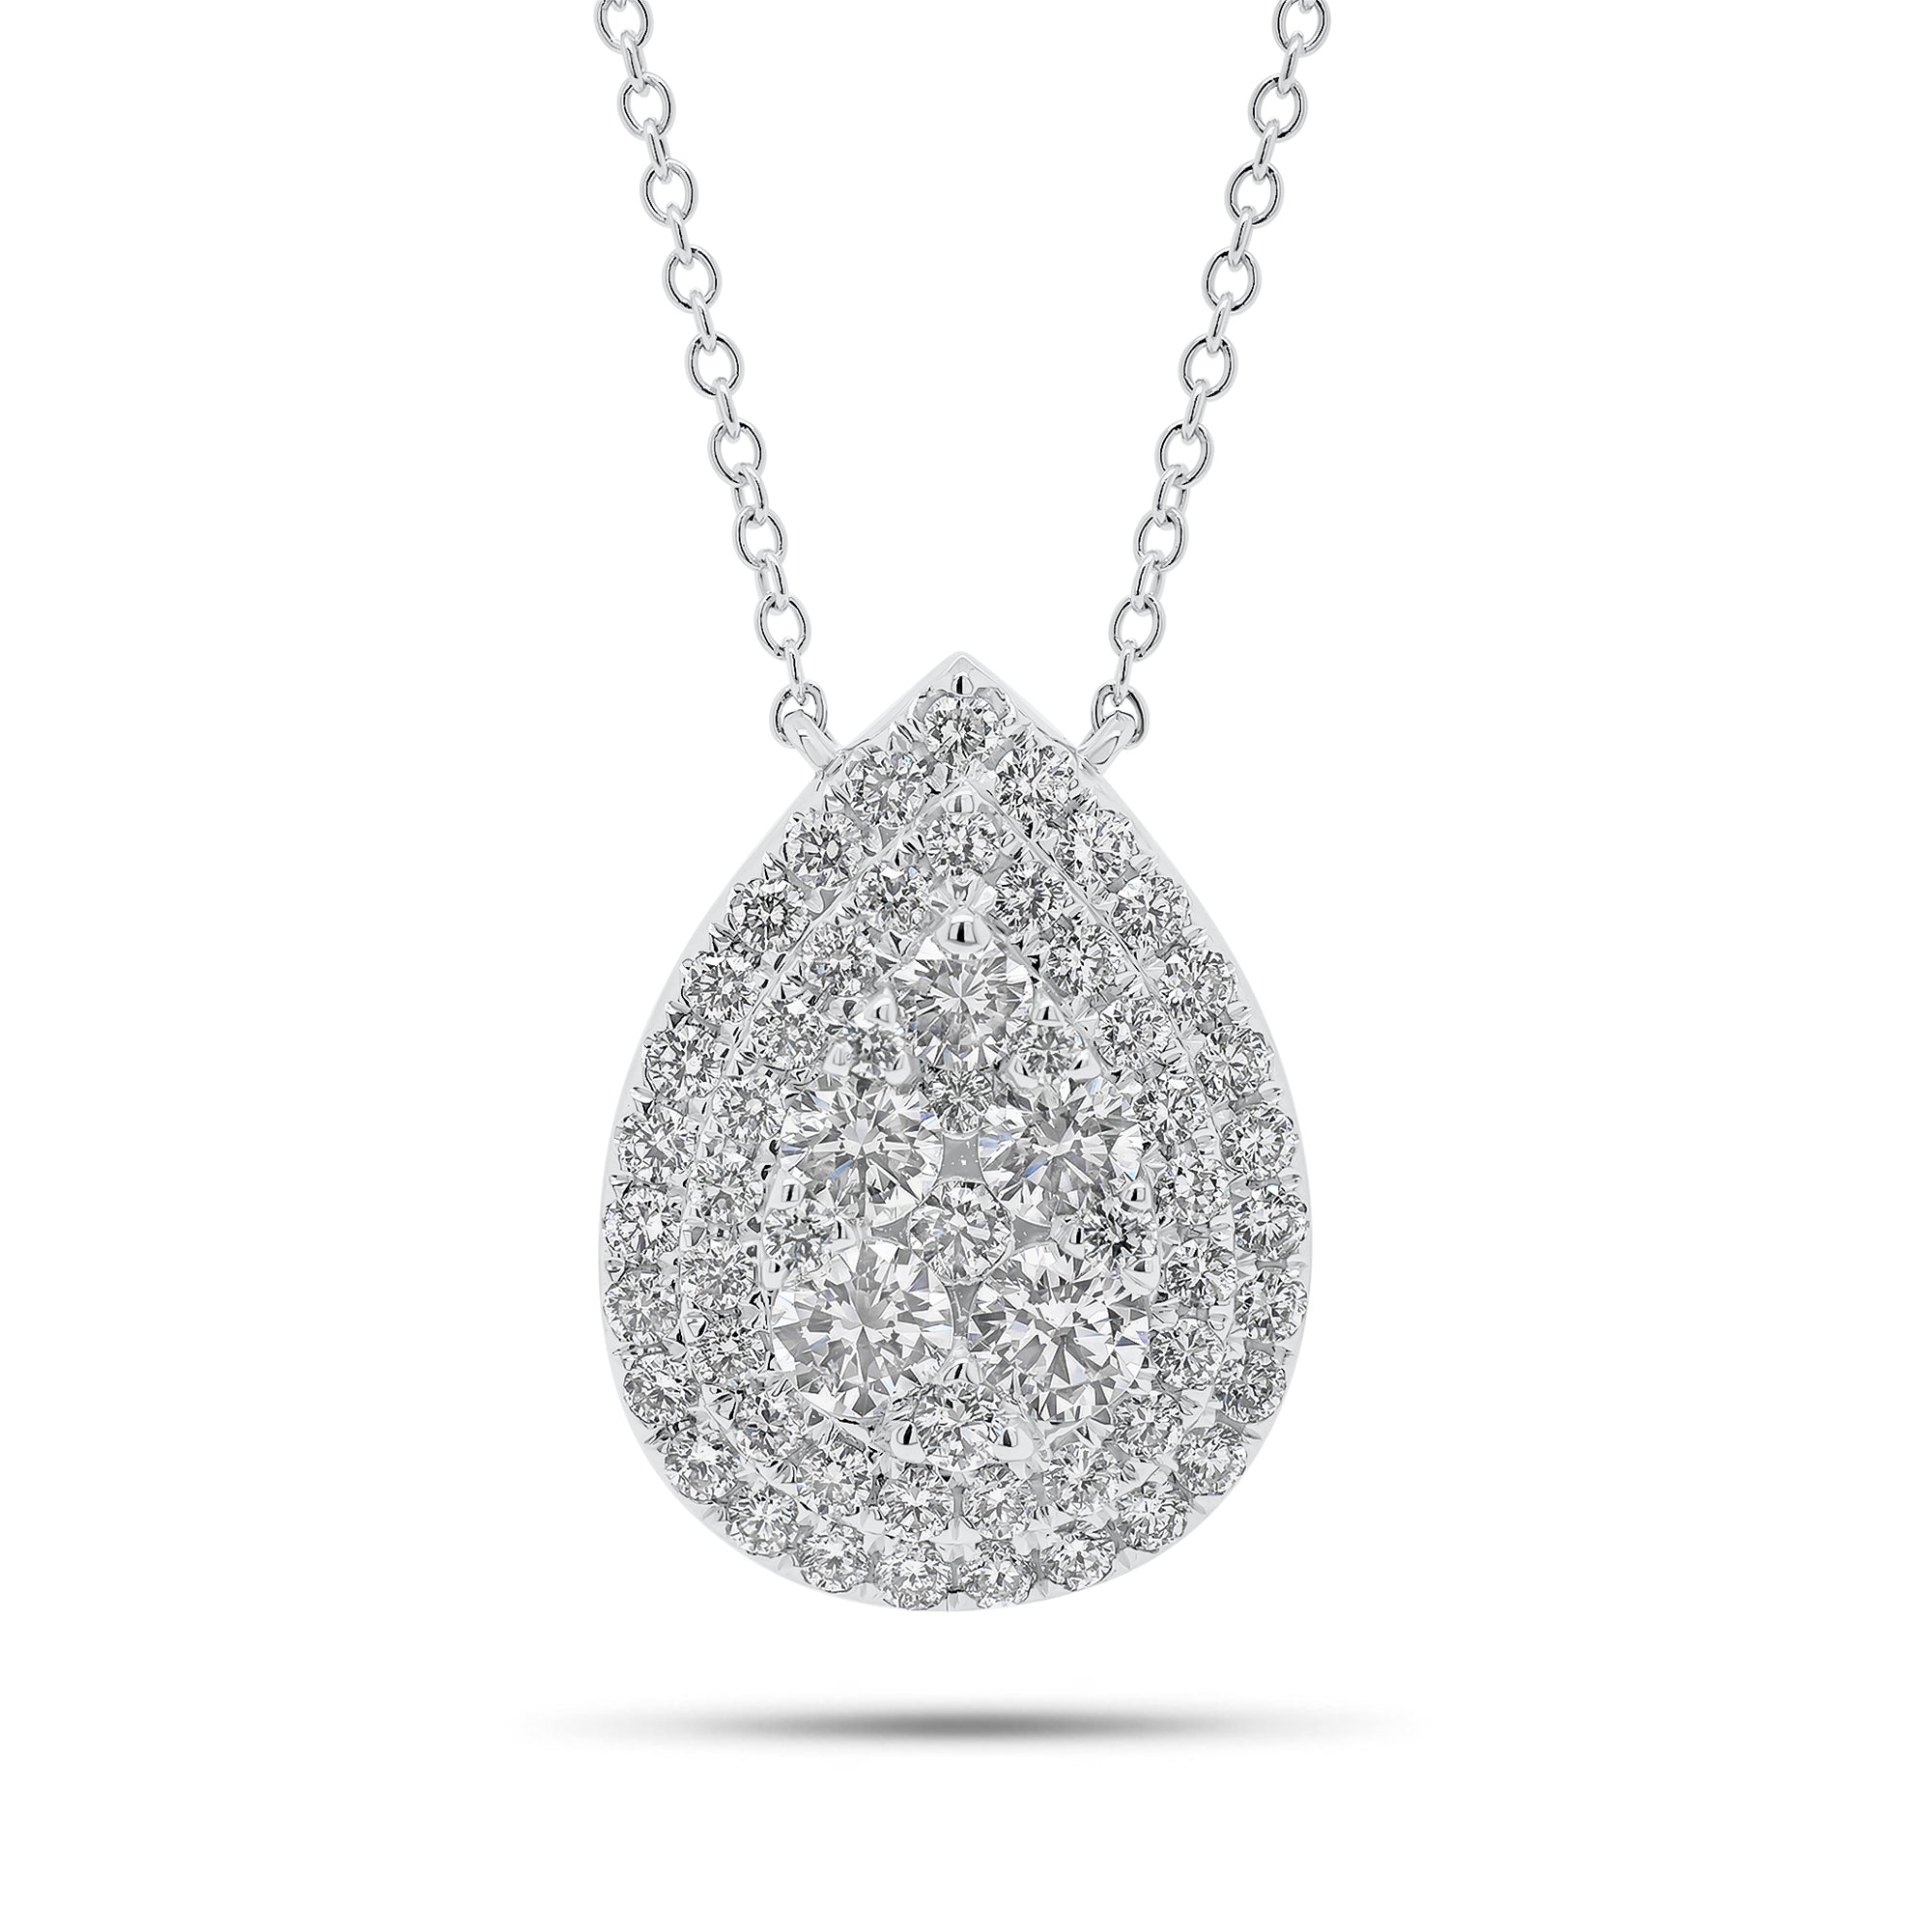 Solid 18K white gold weighing 3.78 grams with 60 round diamonds weighing 1.89 carats Pave Diamond Teardrop Pendant Necklace | Nuha Jewelers